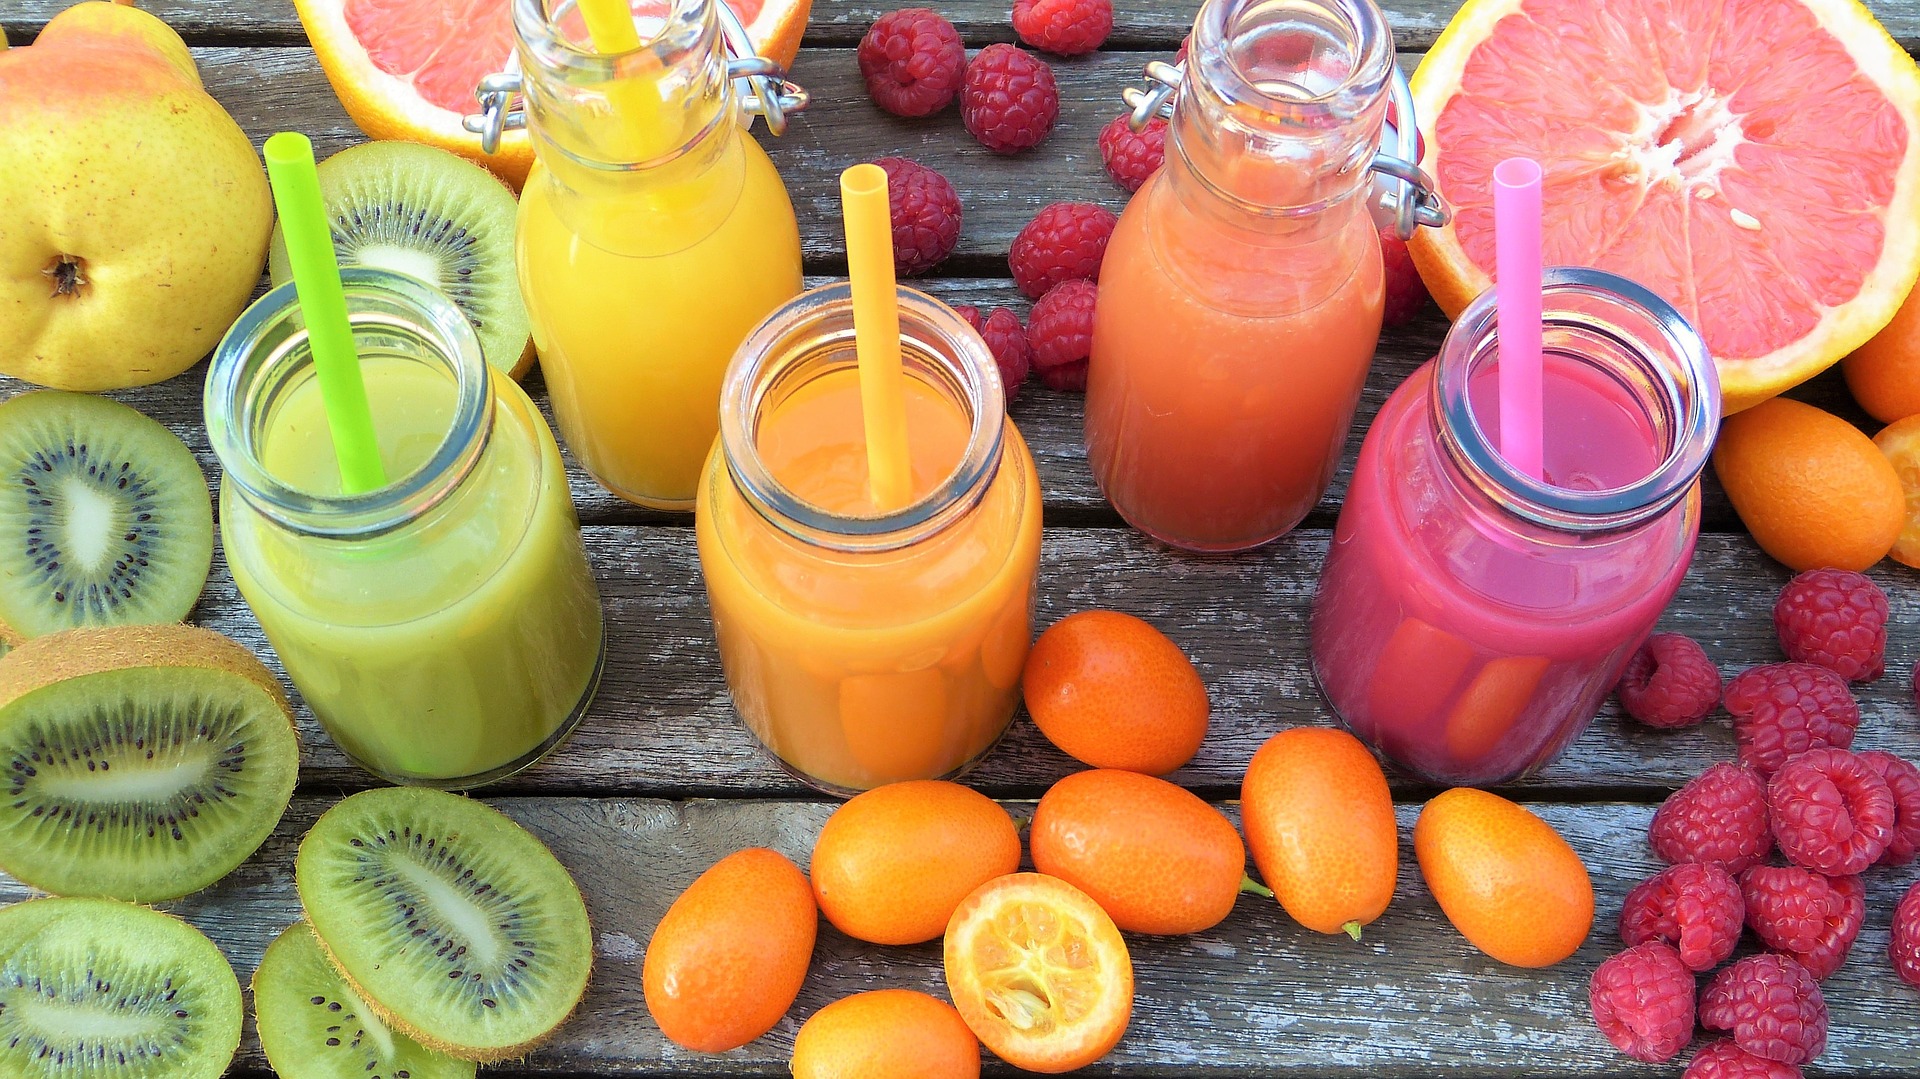 Juices and fruits